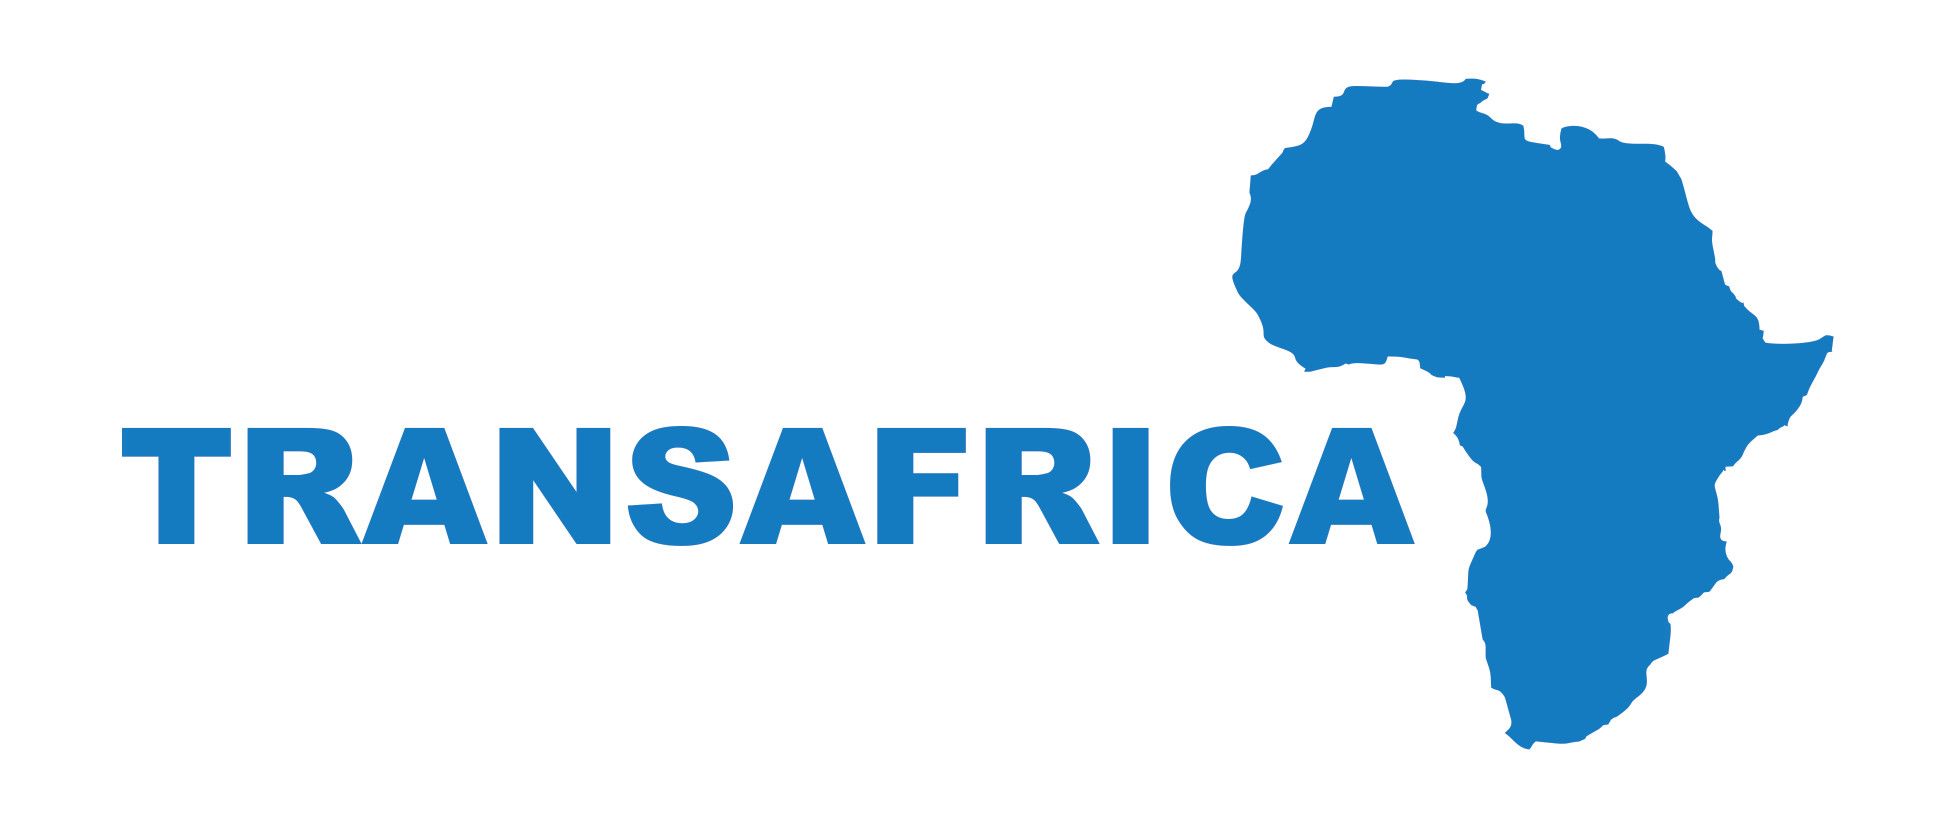 About Transafrica